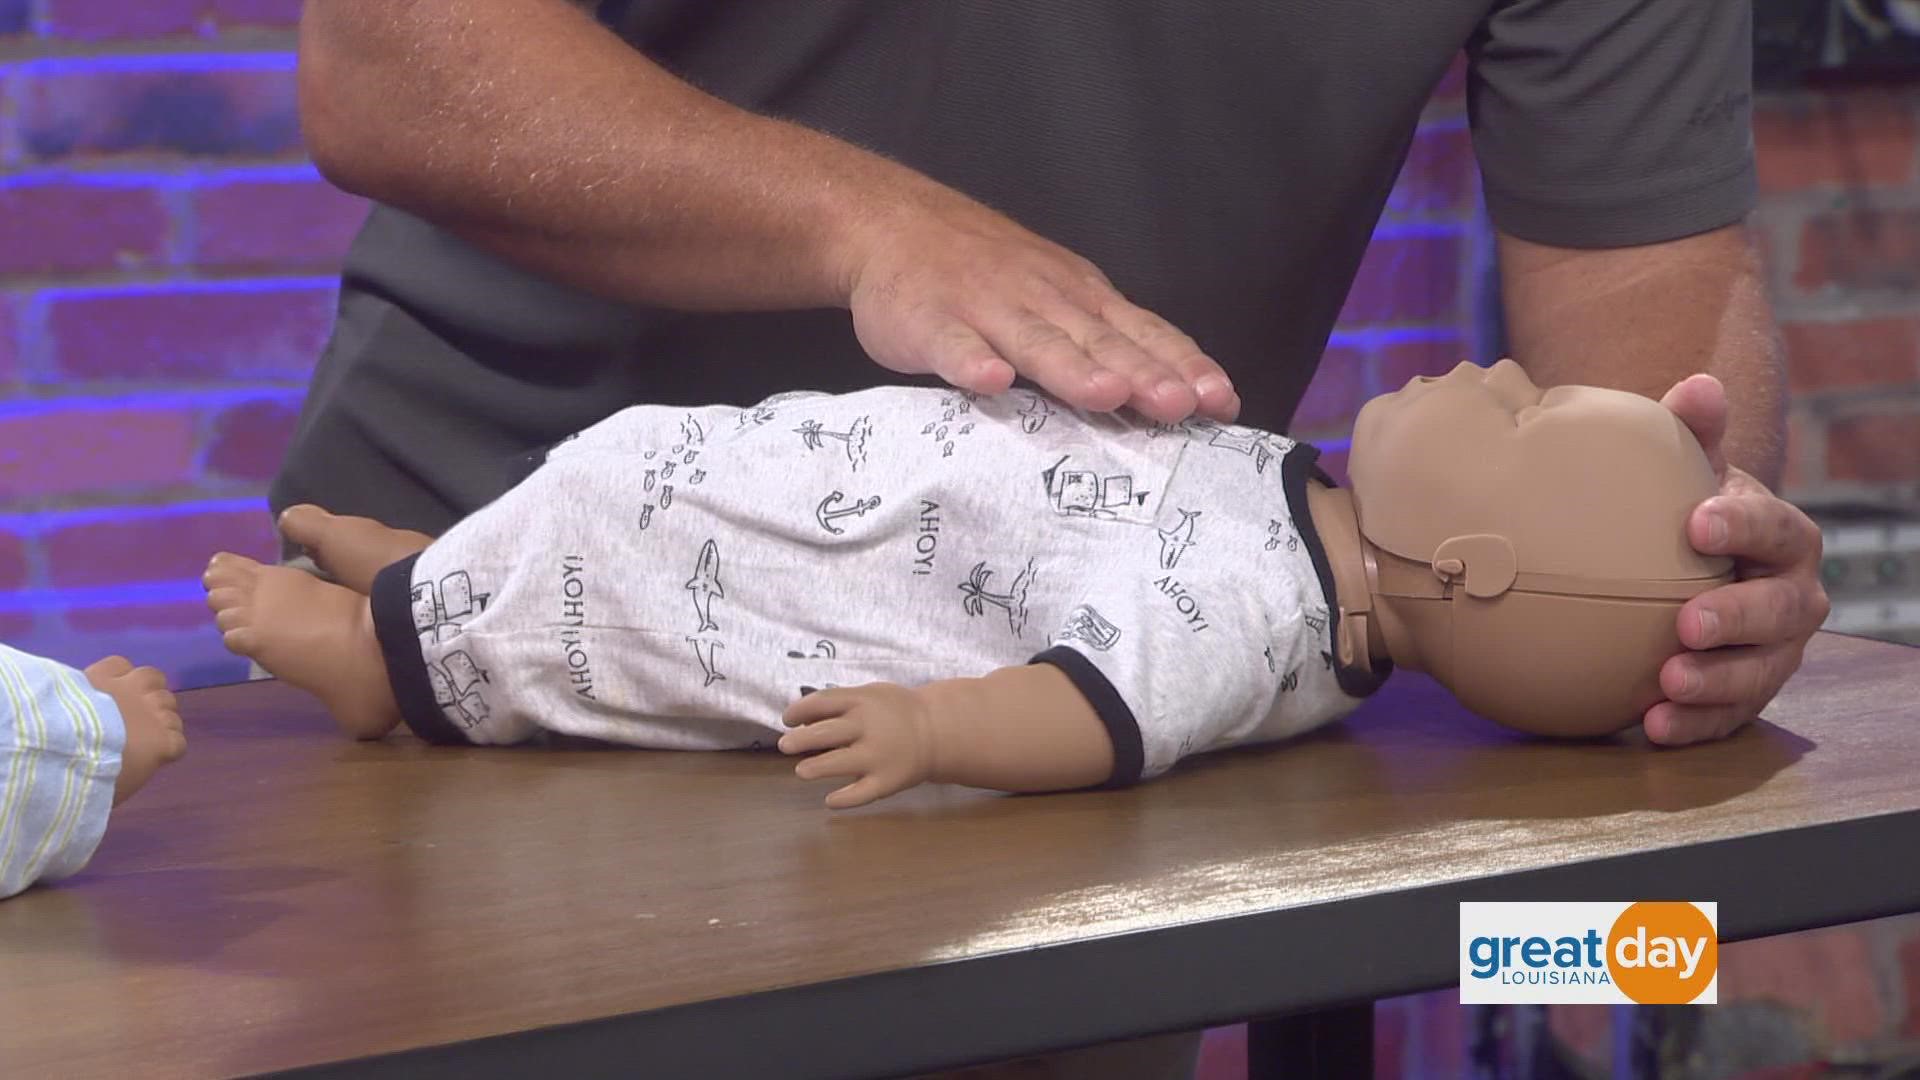 The American Red Cross gives us a lesson in infant CPR.